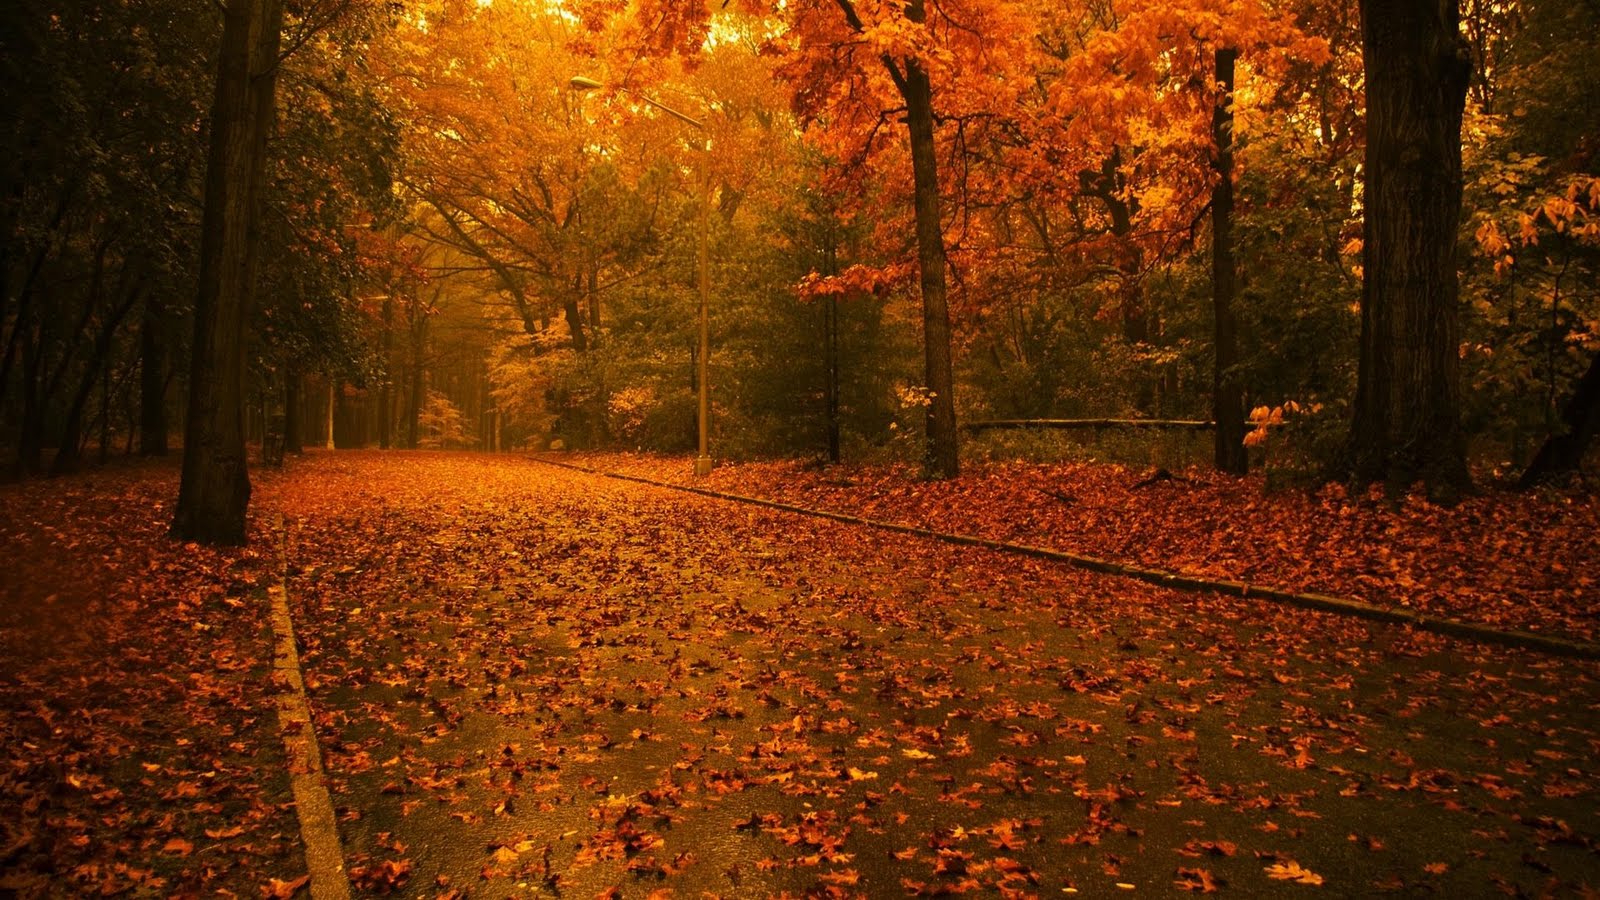 Autumn Leaves HD Wallpaper Cool Here